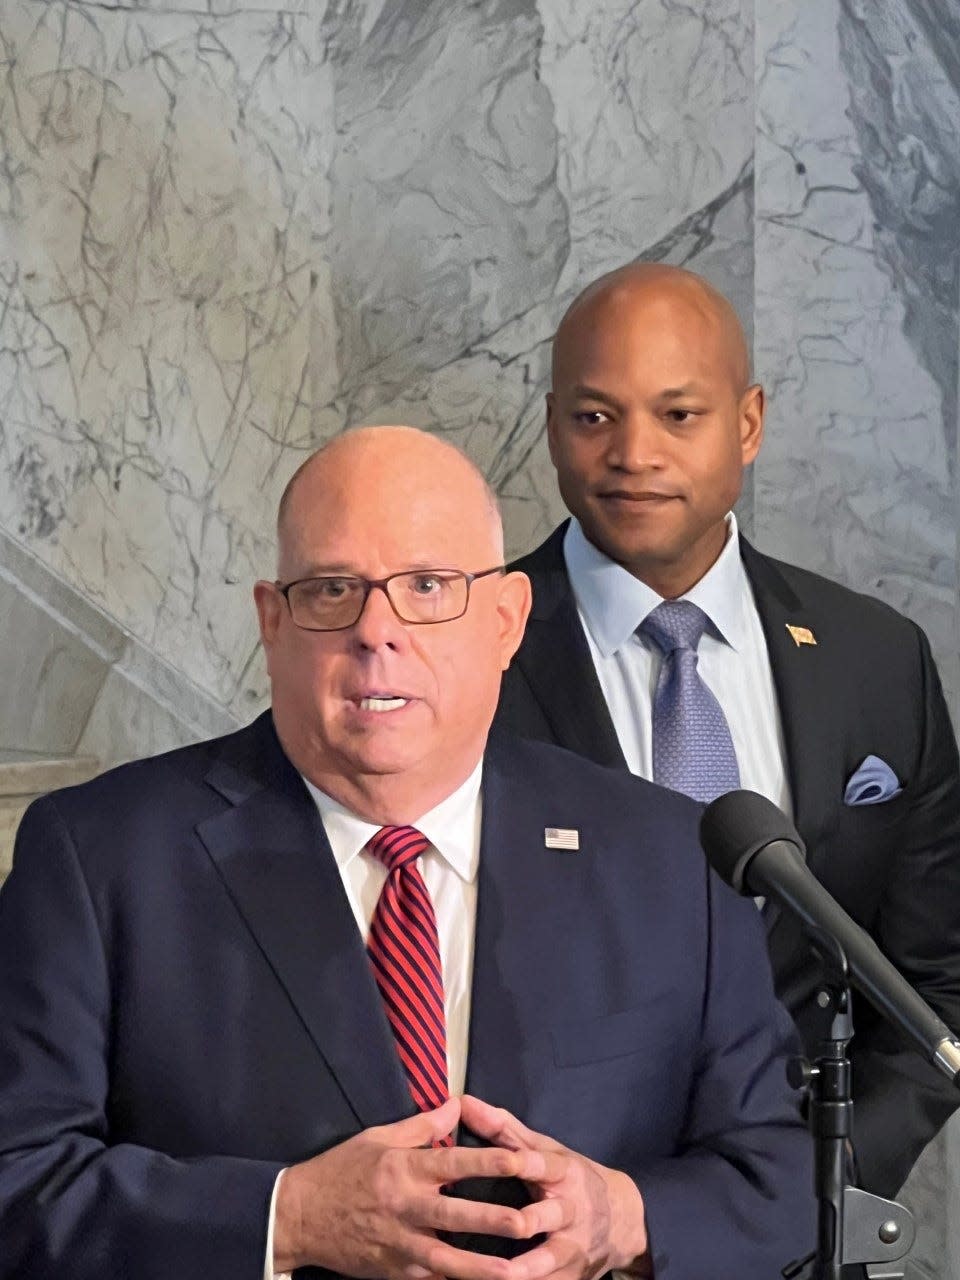 Governor Larry Hogan, left, speaks to reporters at the State House in Annapolis on Nov. 10, 2022, as Governor-Elect, right, looks on.